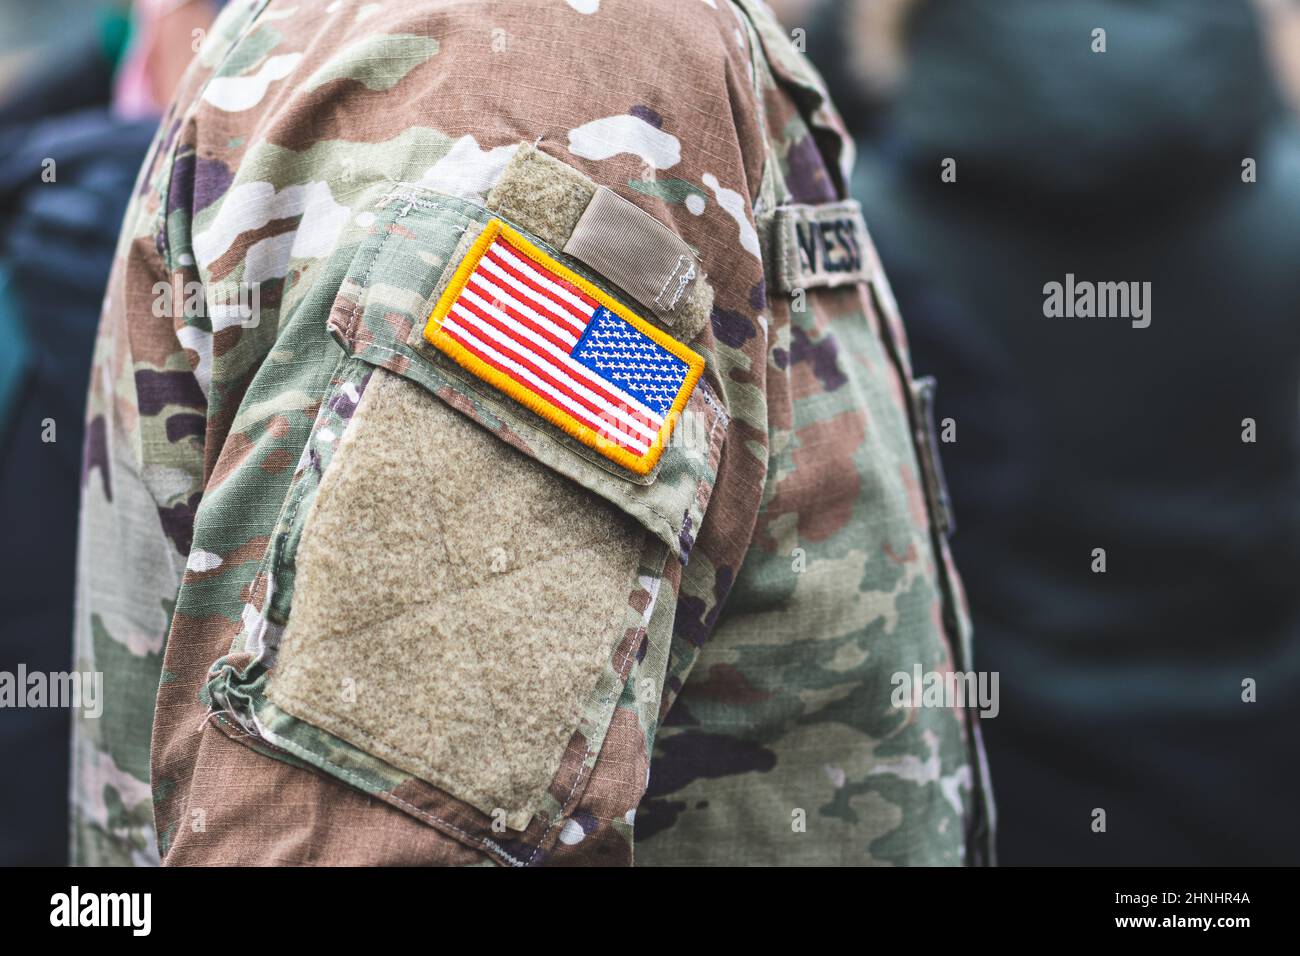 Flag of United States Marine Corps, USA or US army, on a soldier uniform Stock Photo